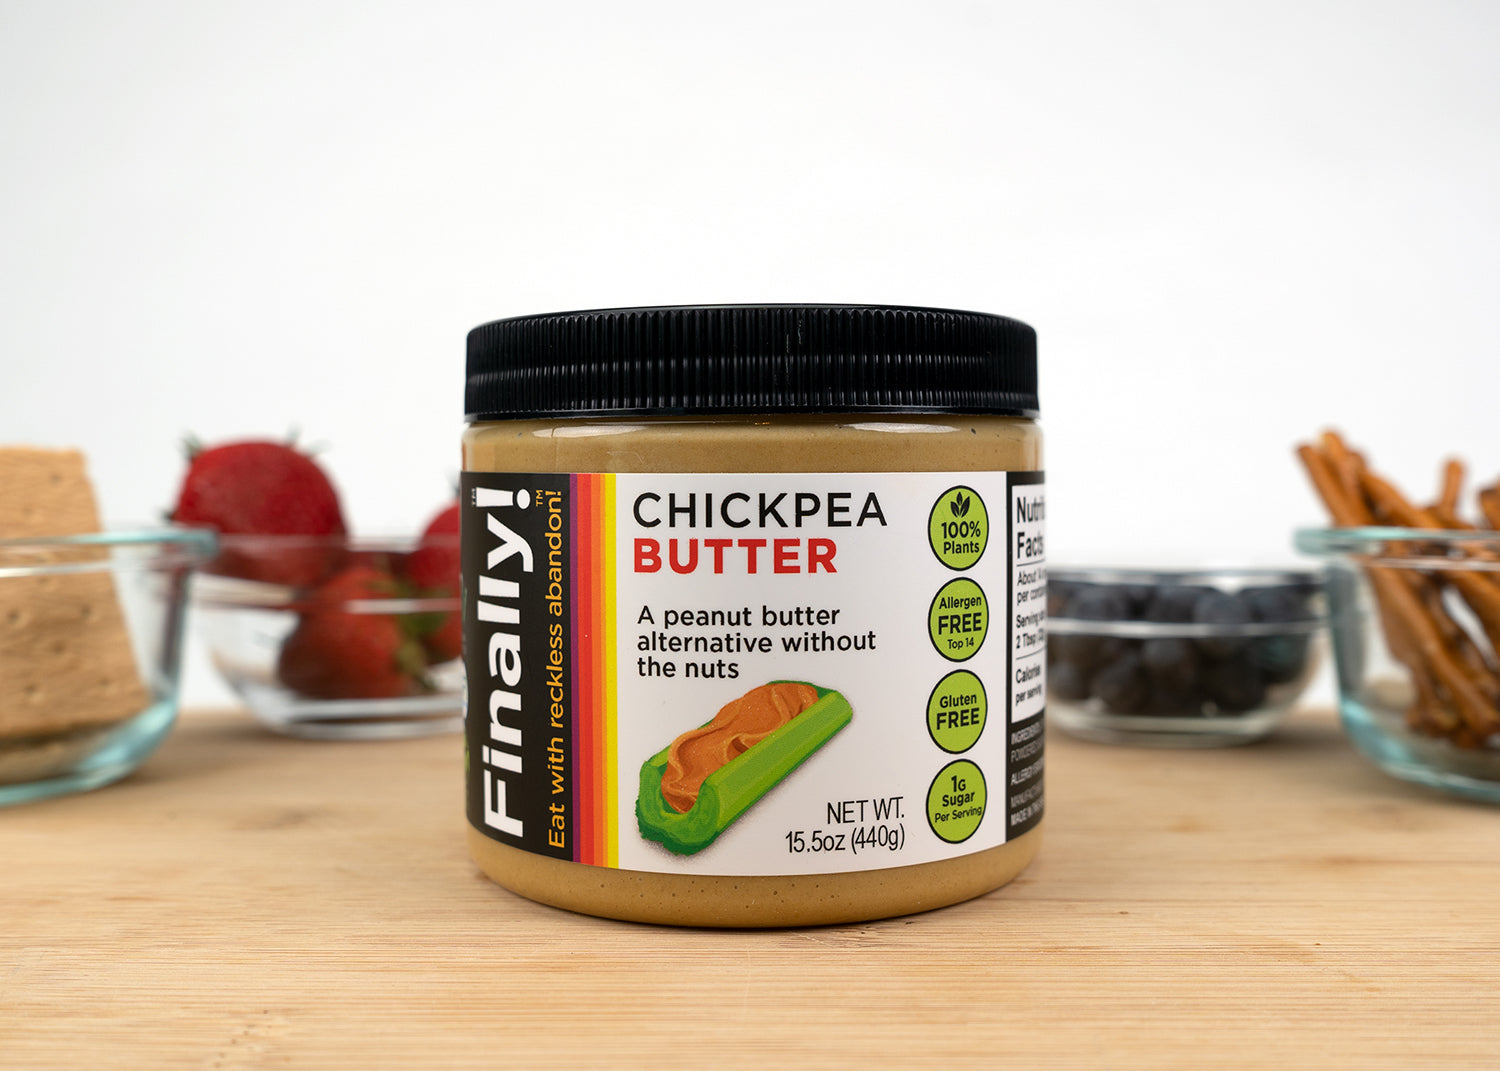 Classic Chickpea Butter